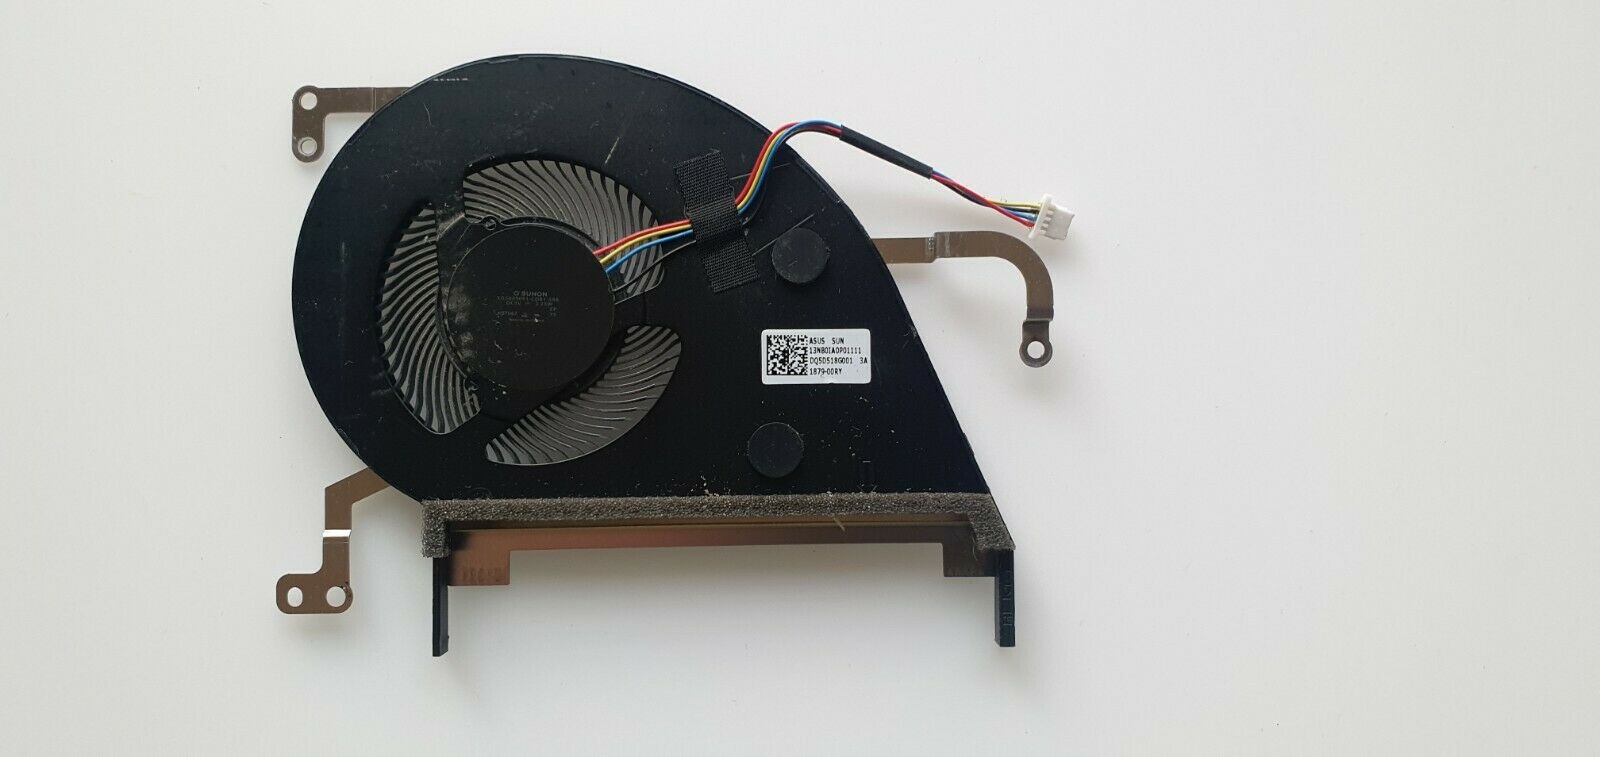 Genuine Asus Vivobook S530F Laptop CPU Cooling Fan 13NB0IA0P01111 Compatible Brand: For ASUS Type